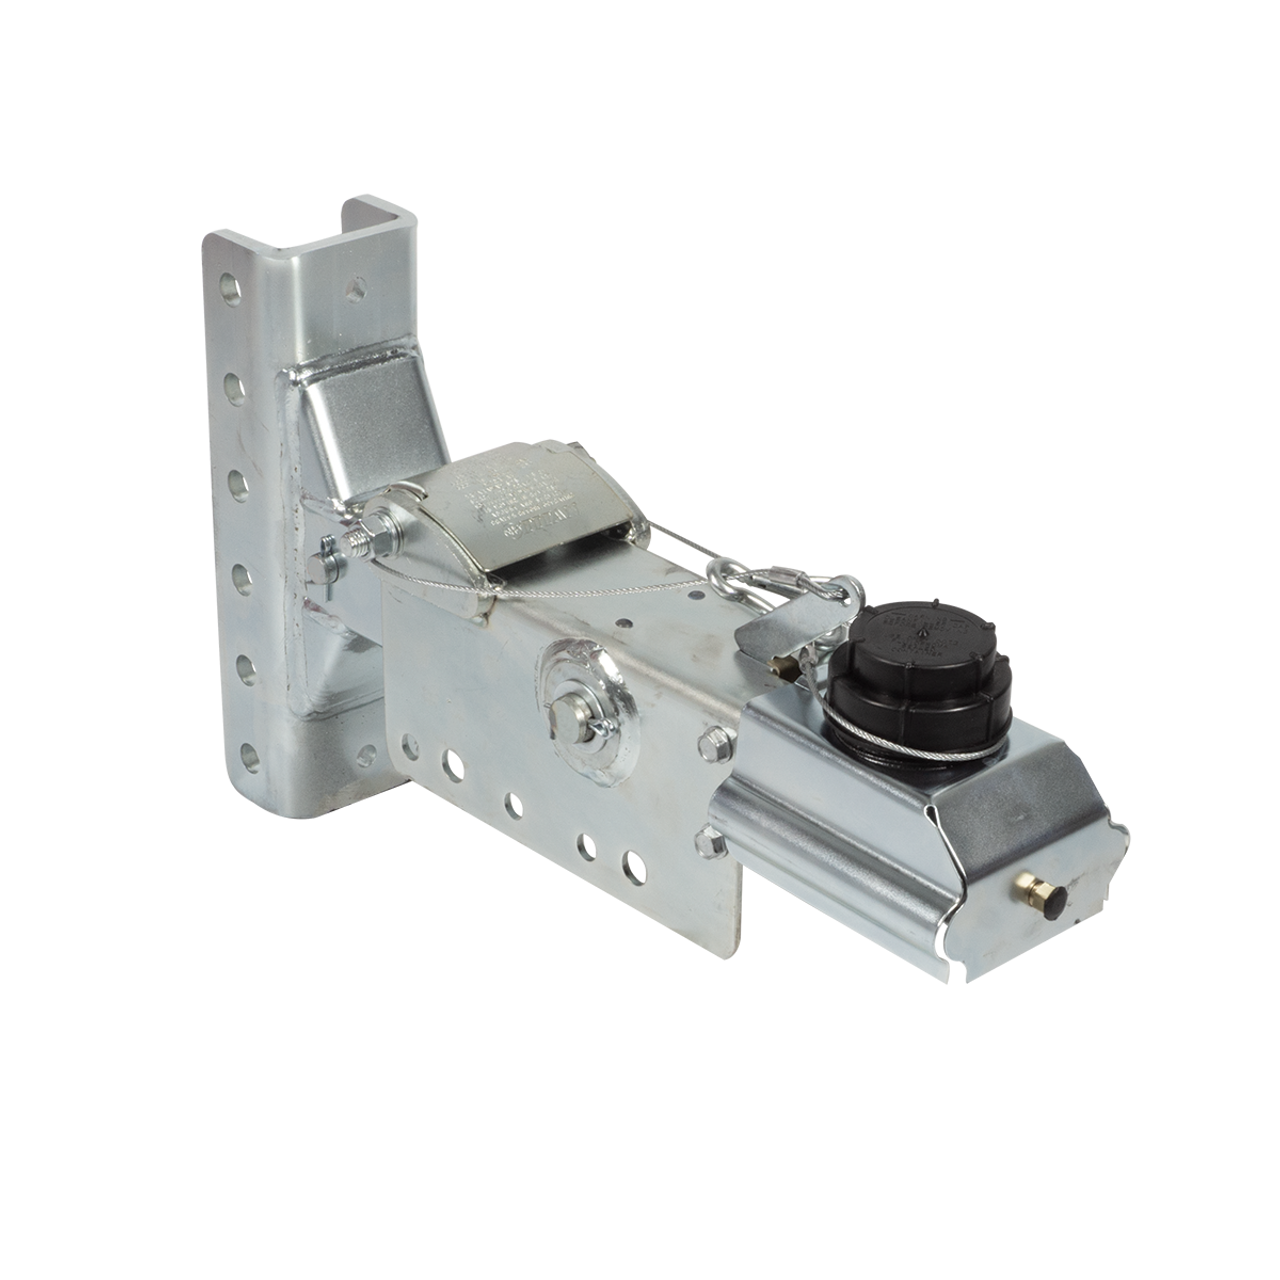 68-335 --- Hydraulic Brake Actuator with 6 hole Channel - 8,000 lb Capacity - Model DX8.0